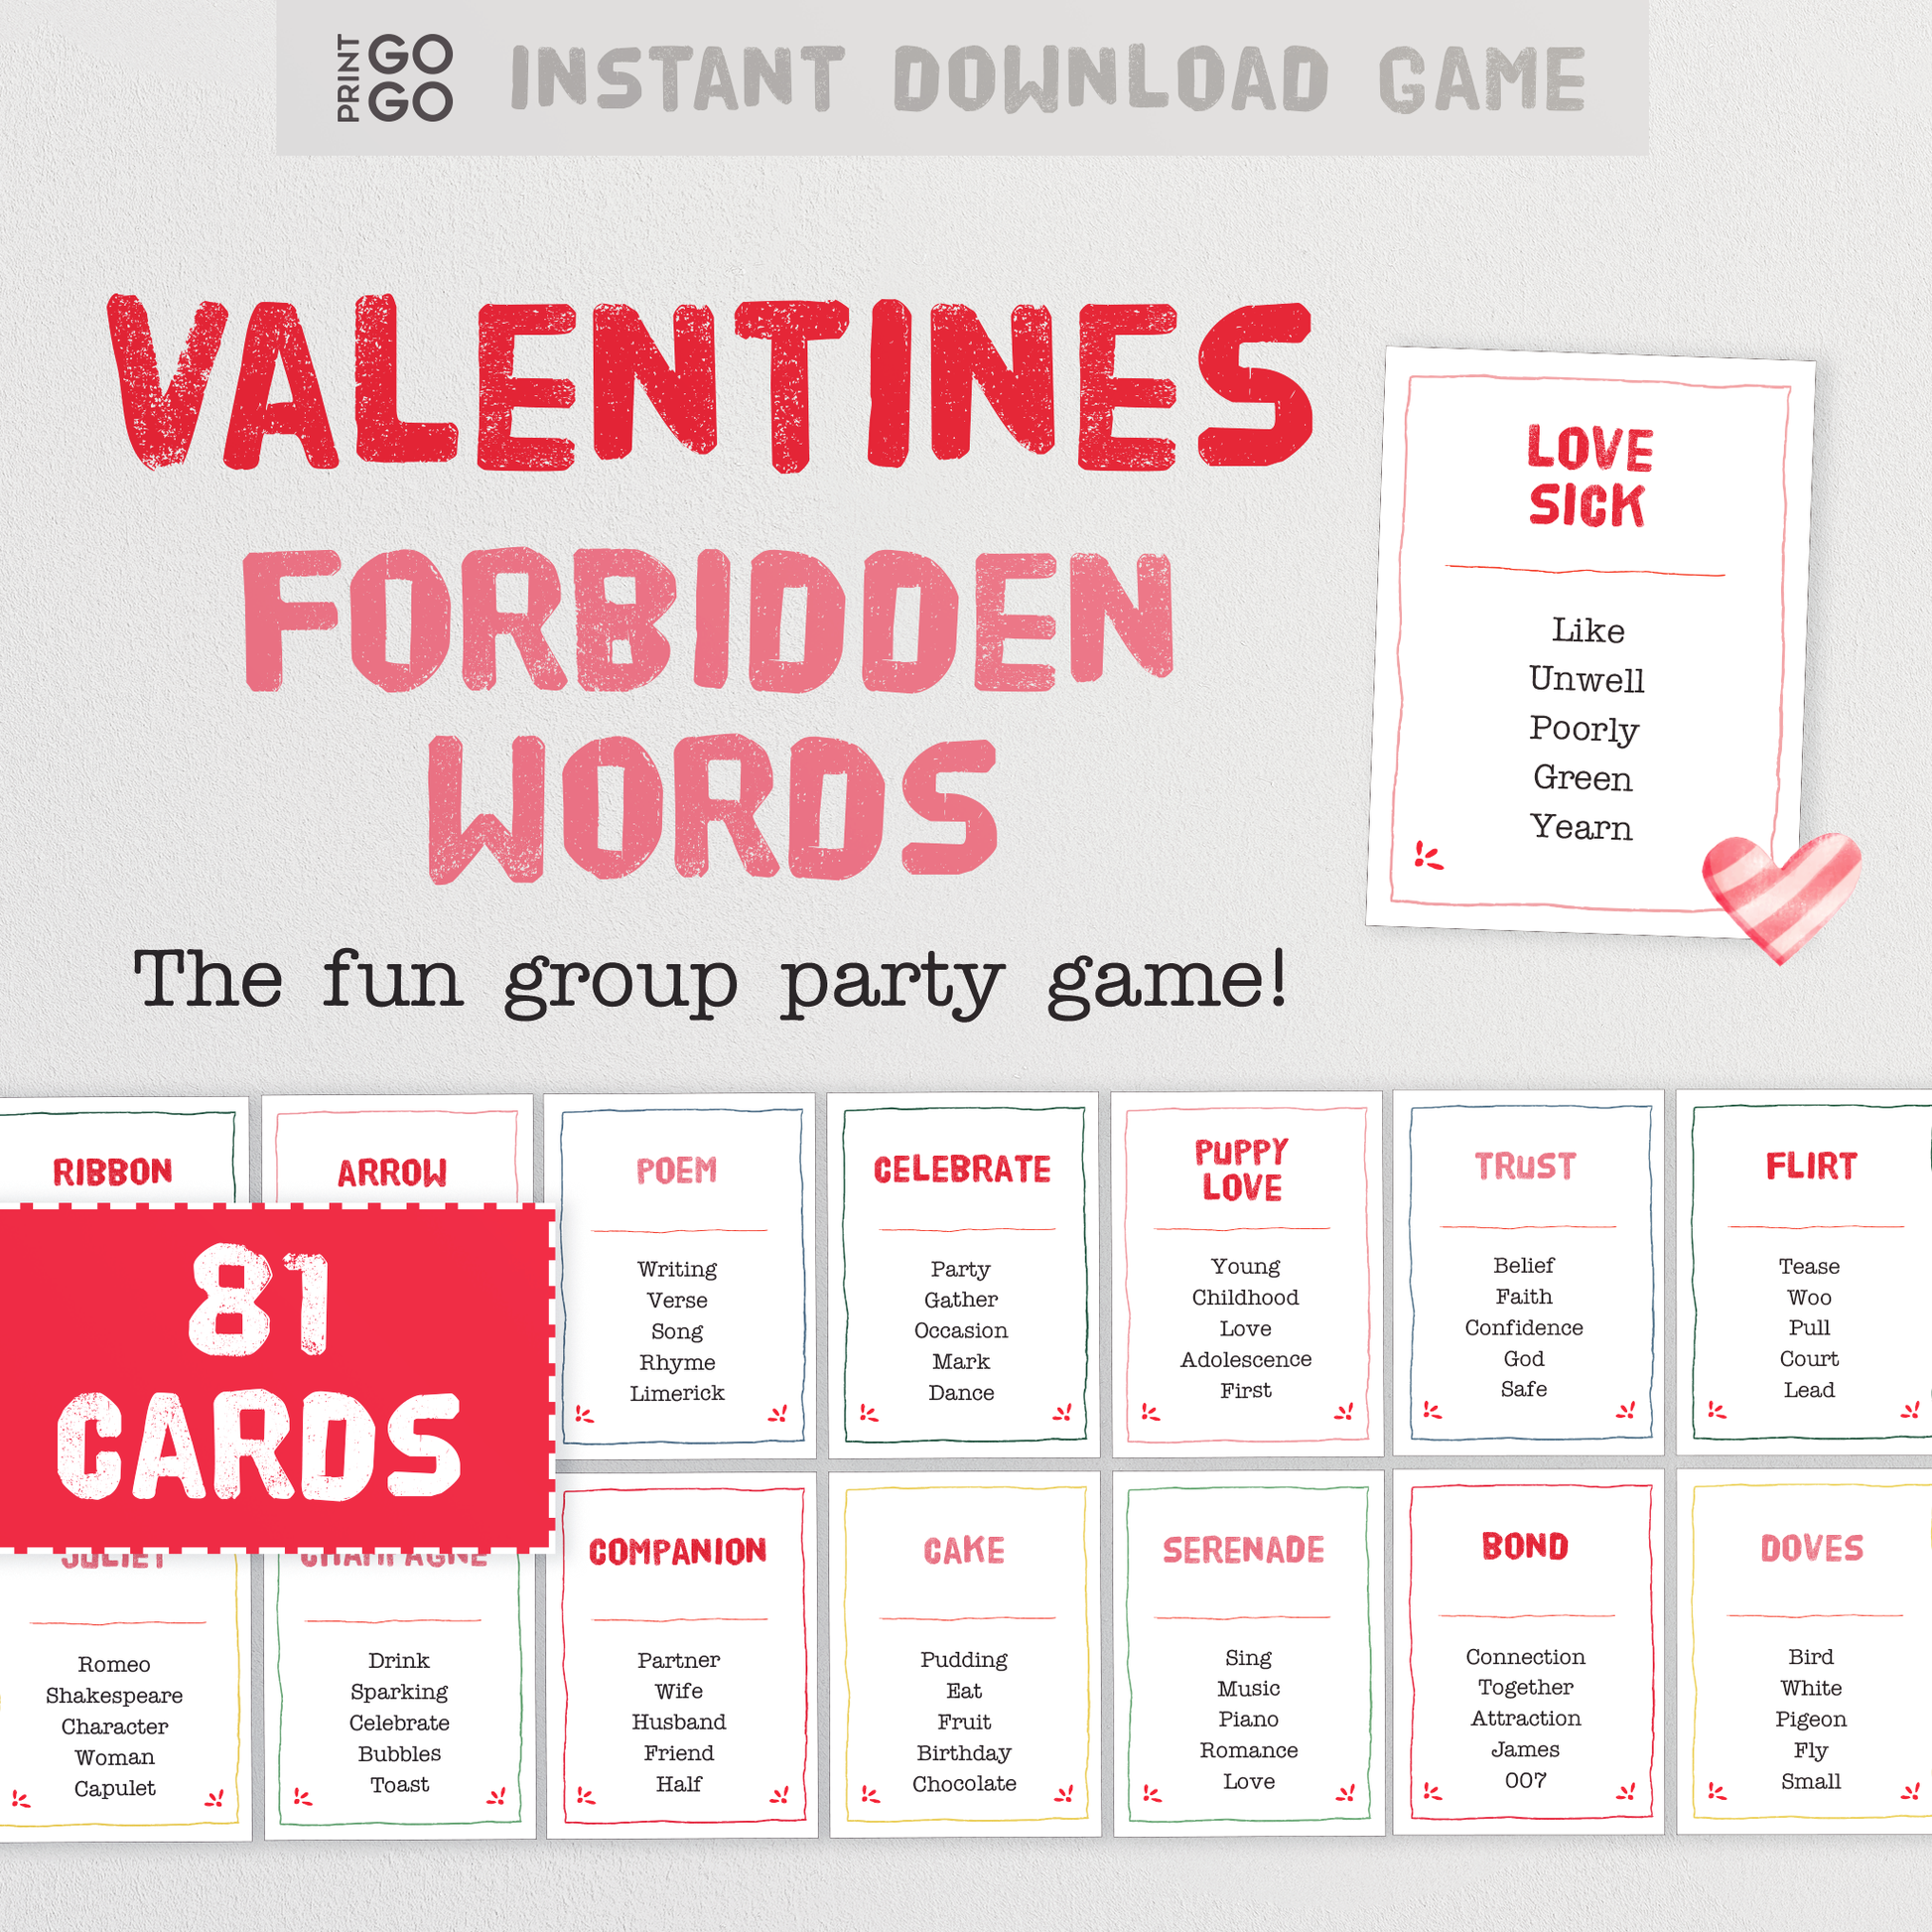 Valentines Day Forbidden Words - The Fun Quick Thinking Group Party Game